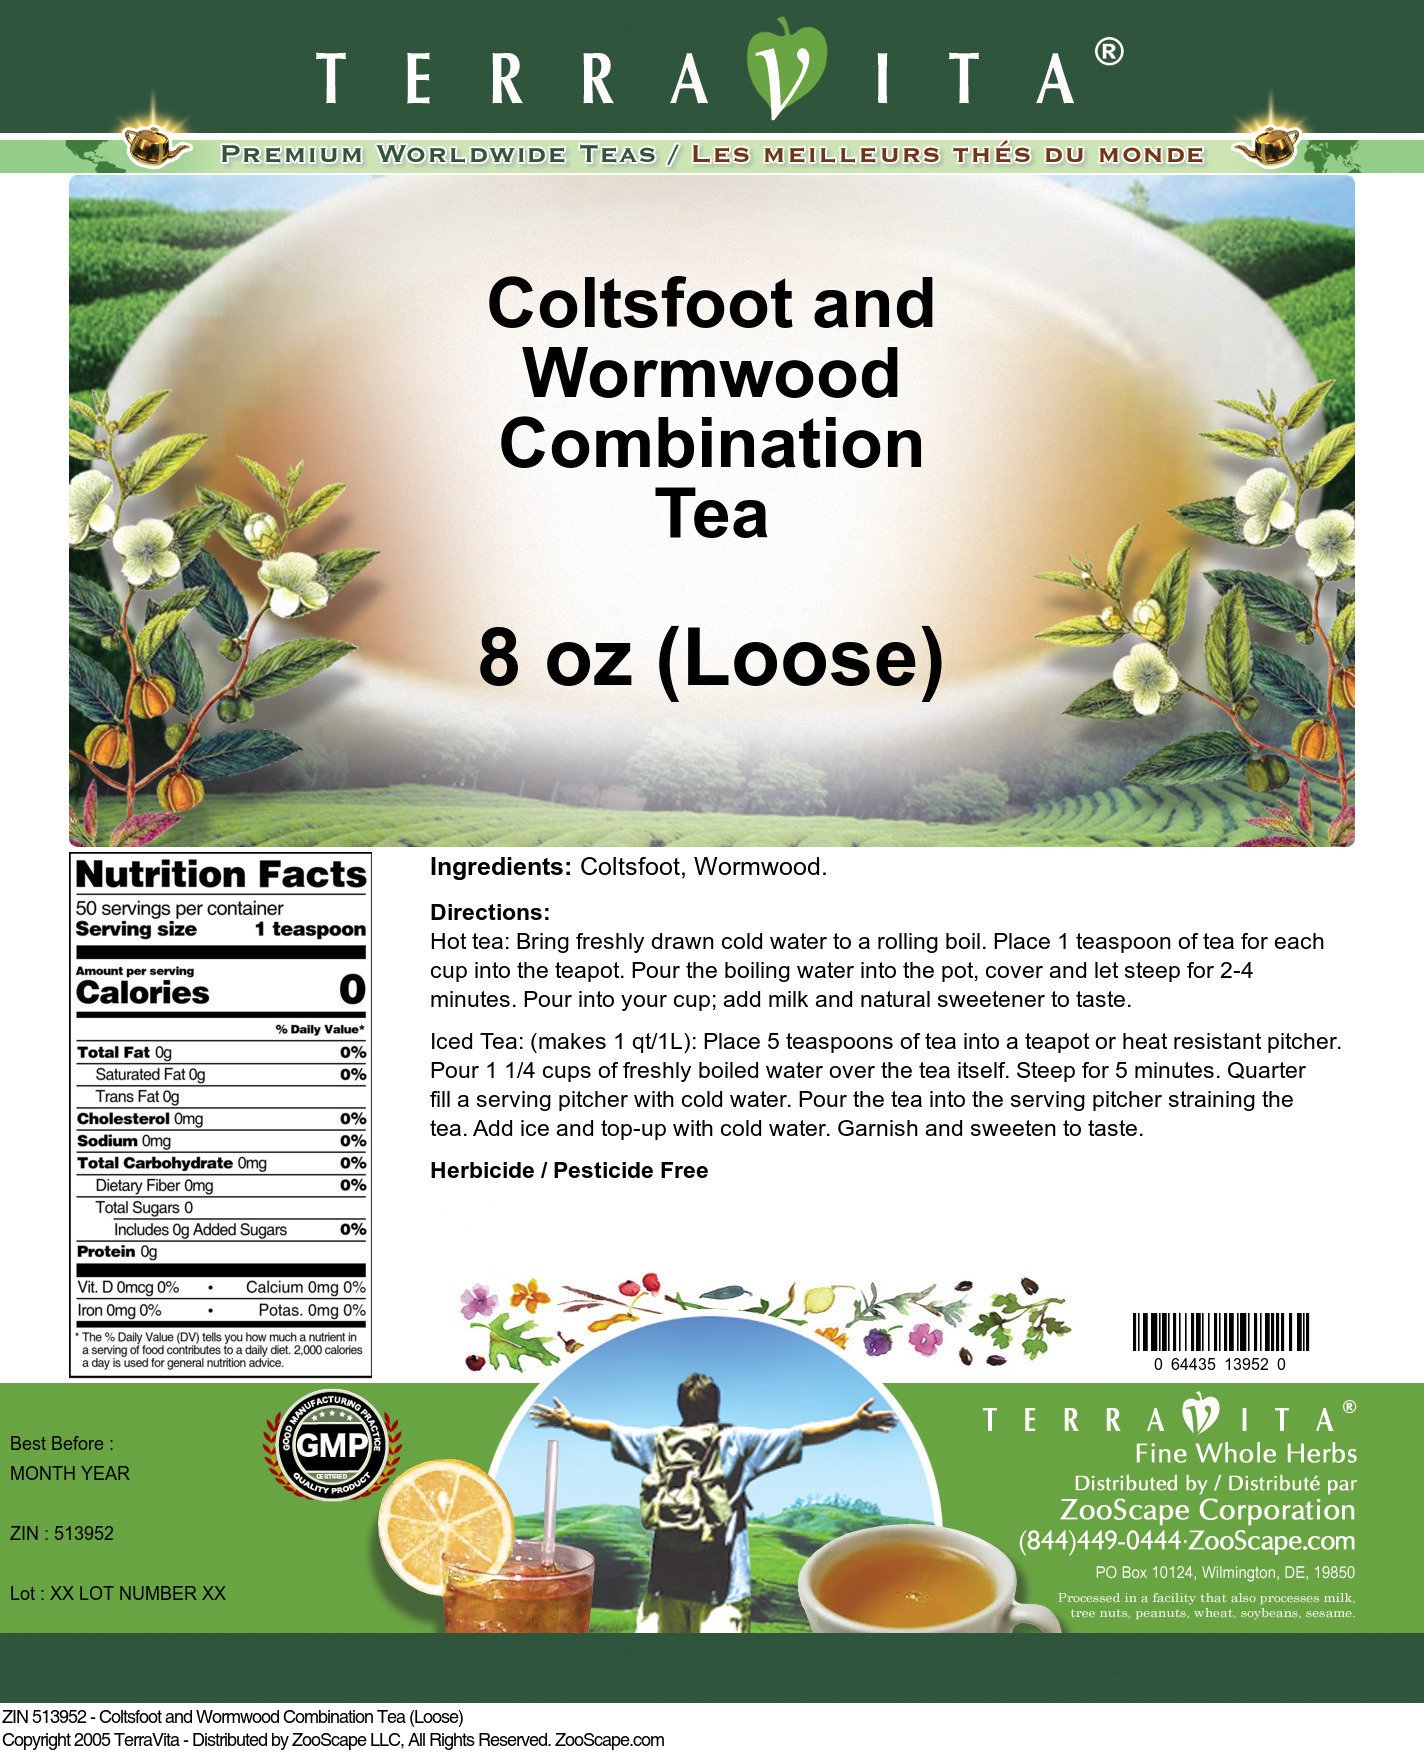 Coltsfoot and Wormwood Combination Tea (Loose) - Label